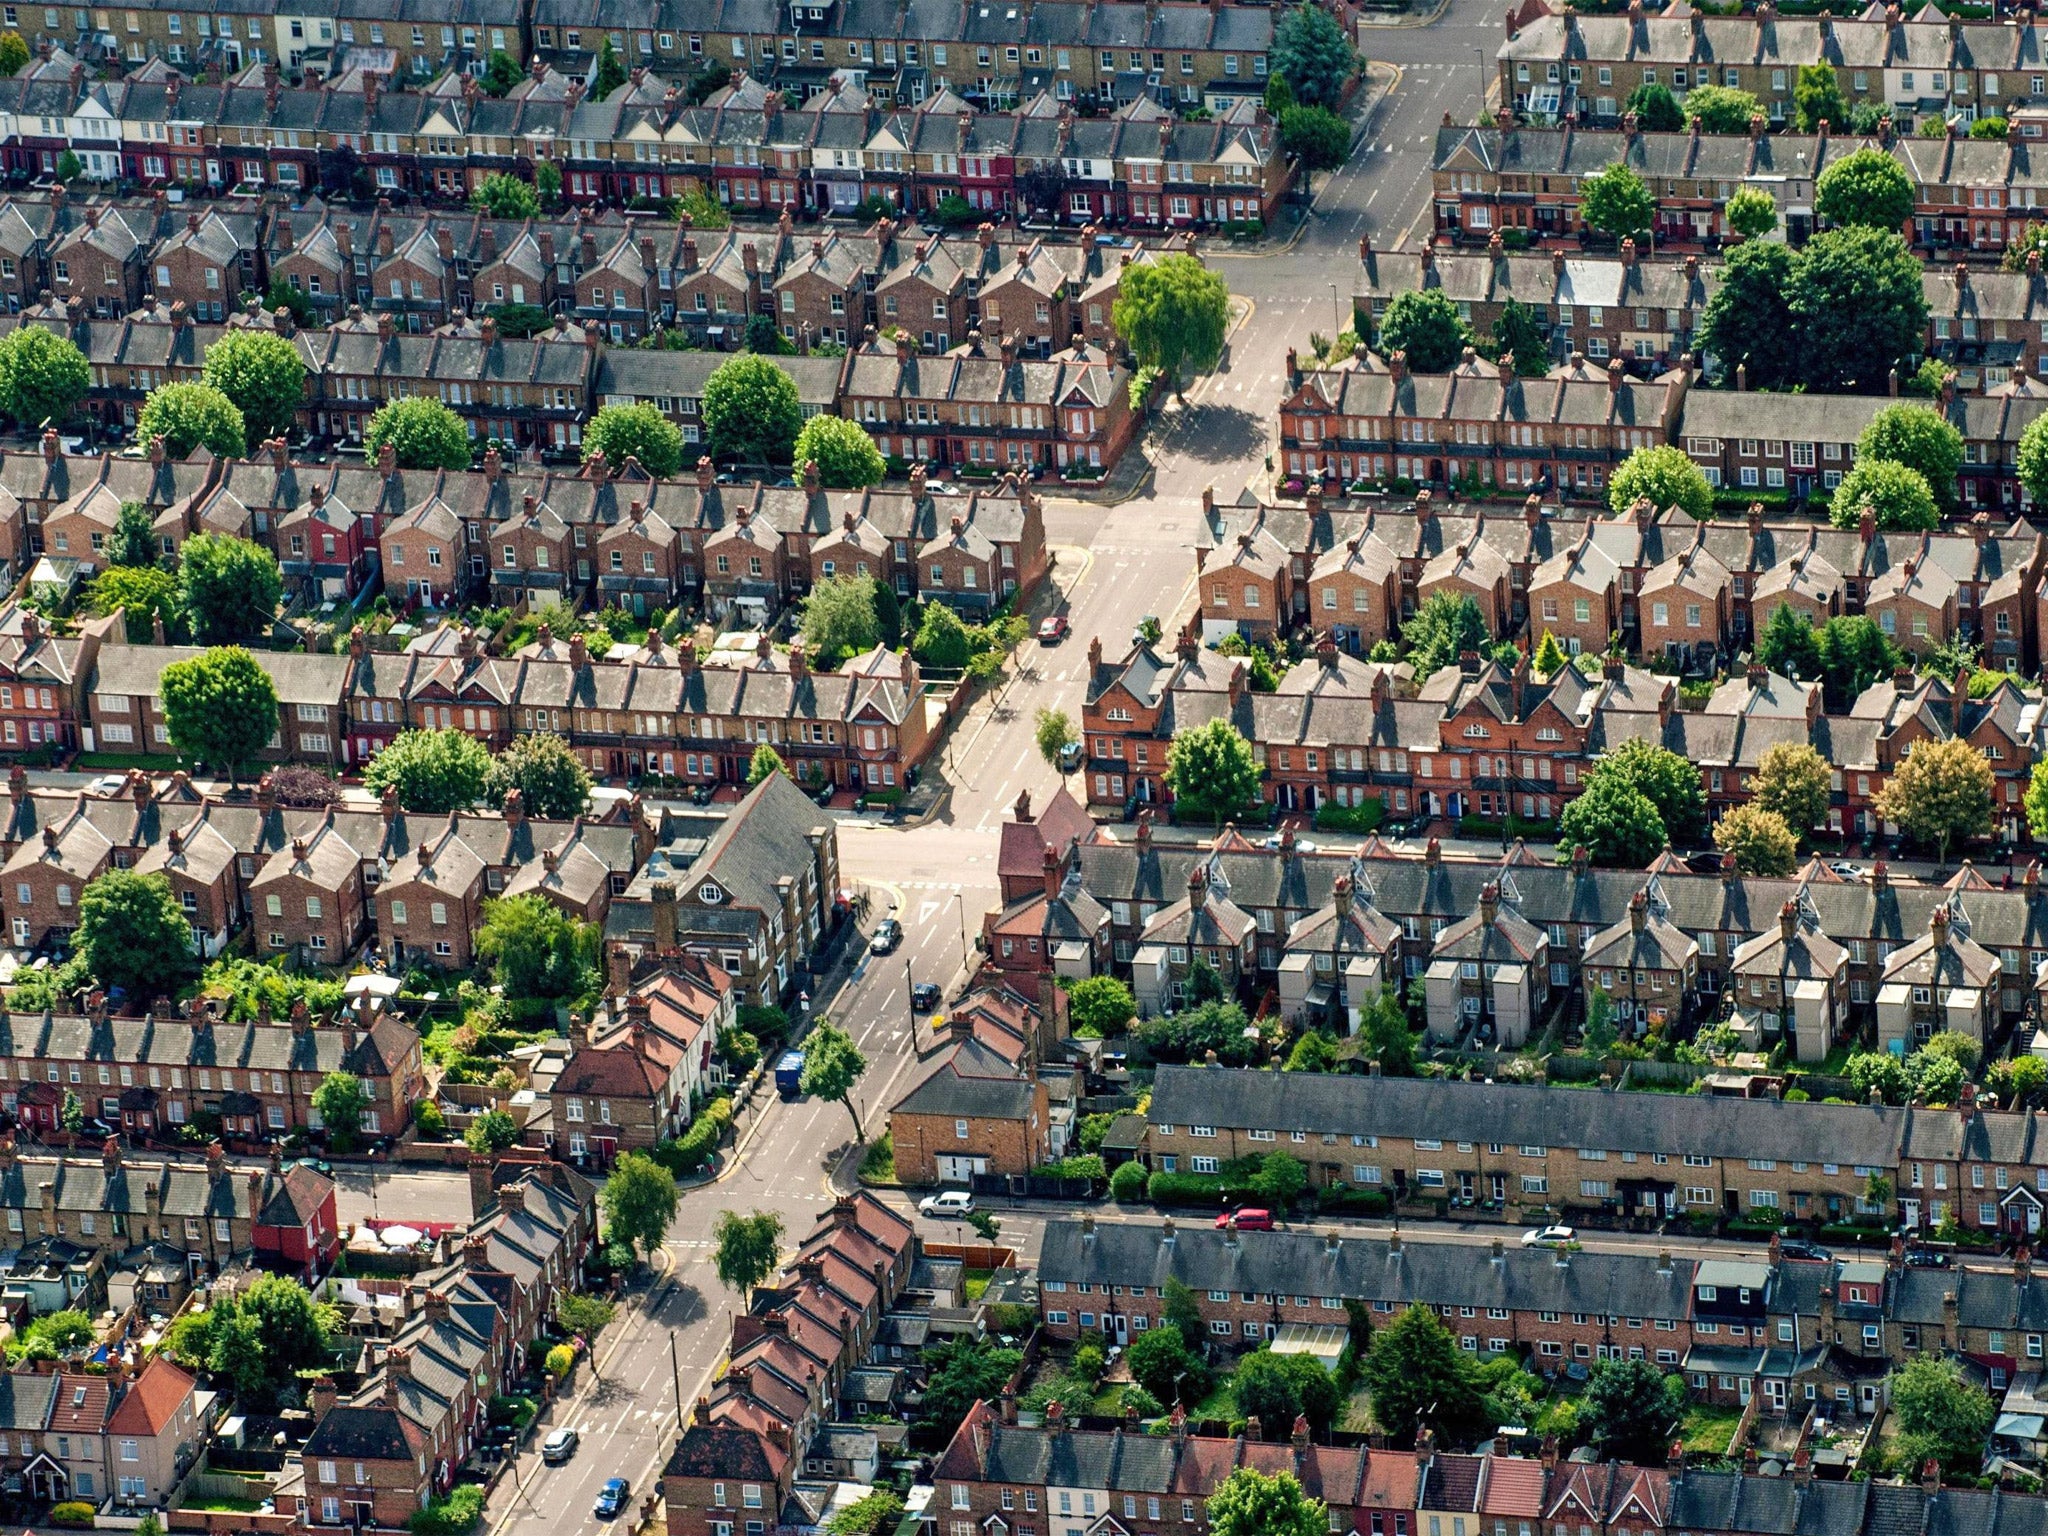 Houses on residential streets in Muswell Hill, north London